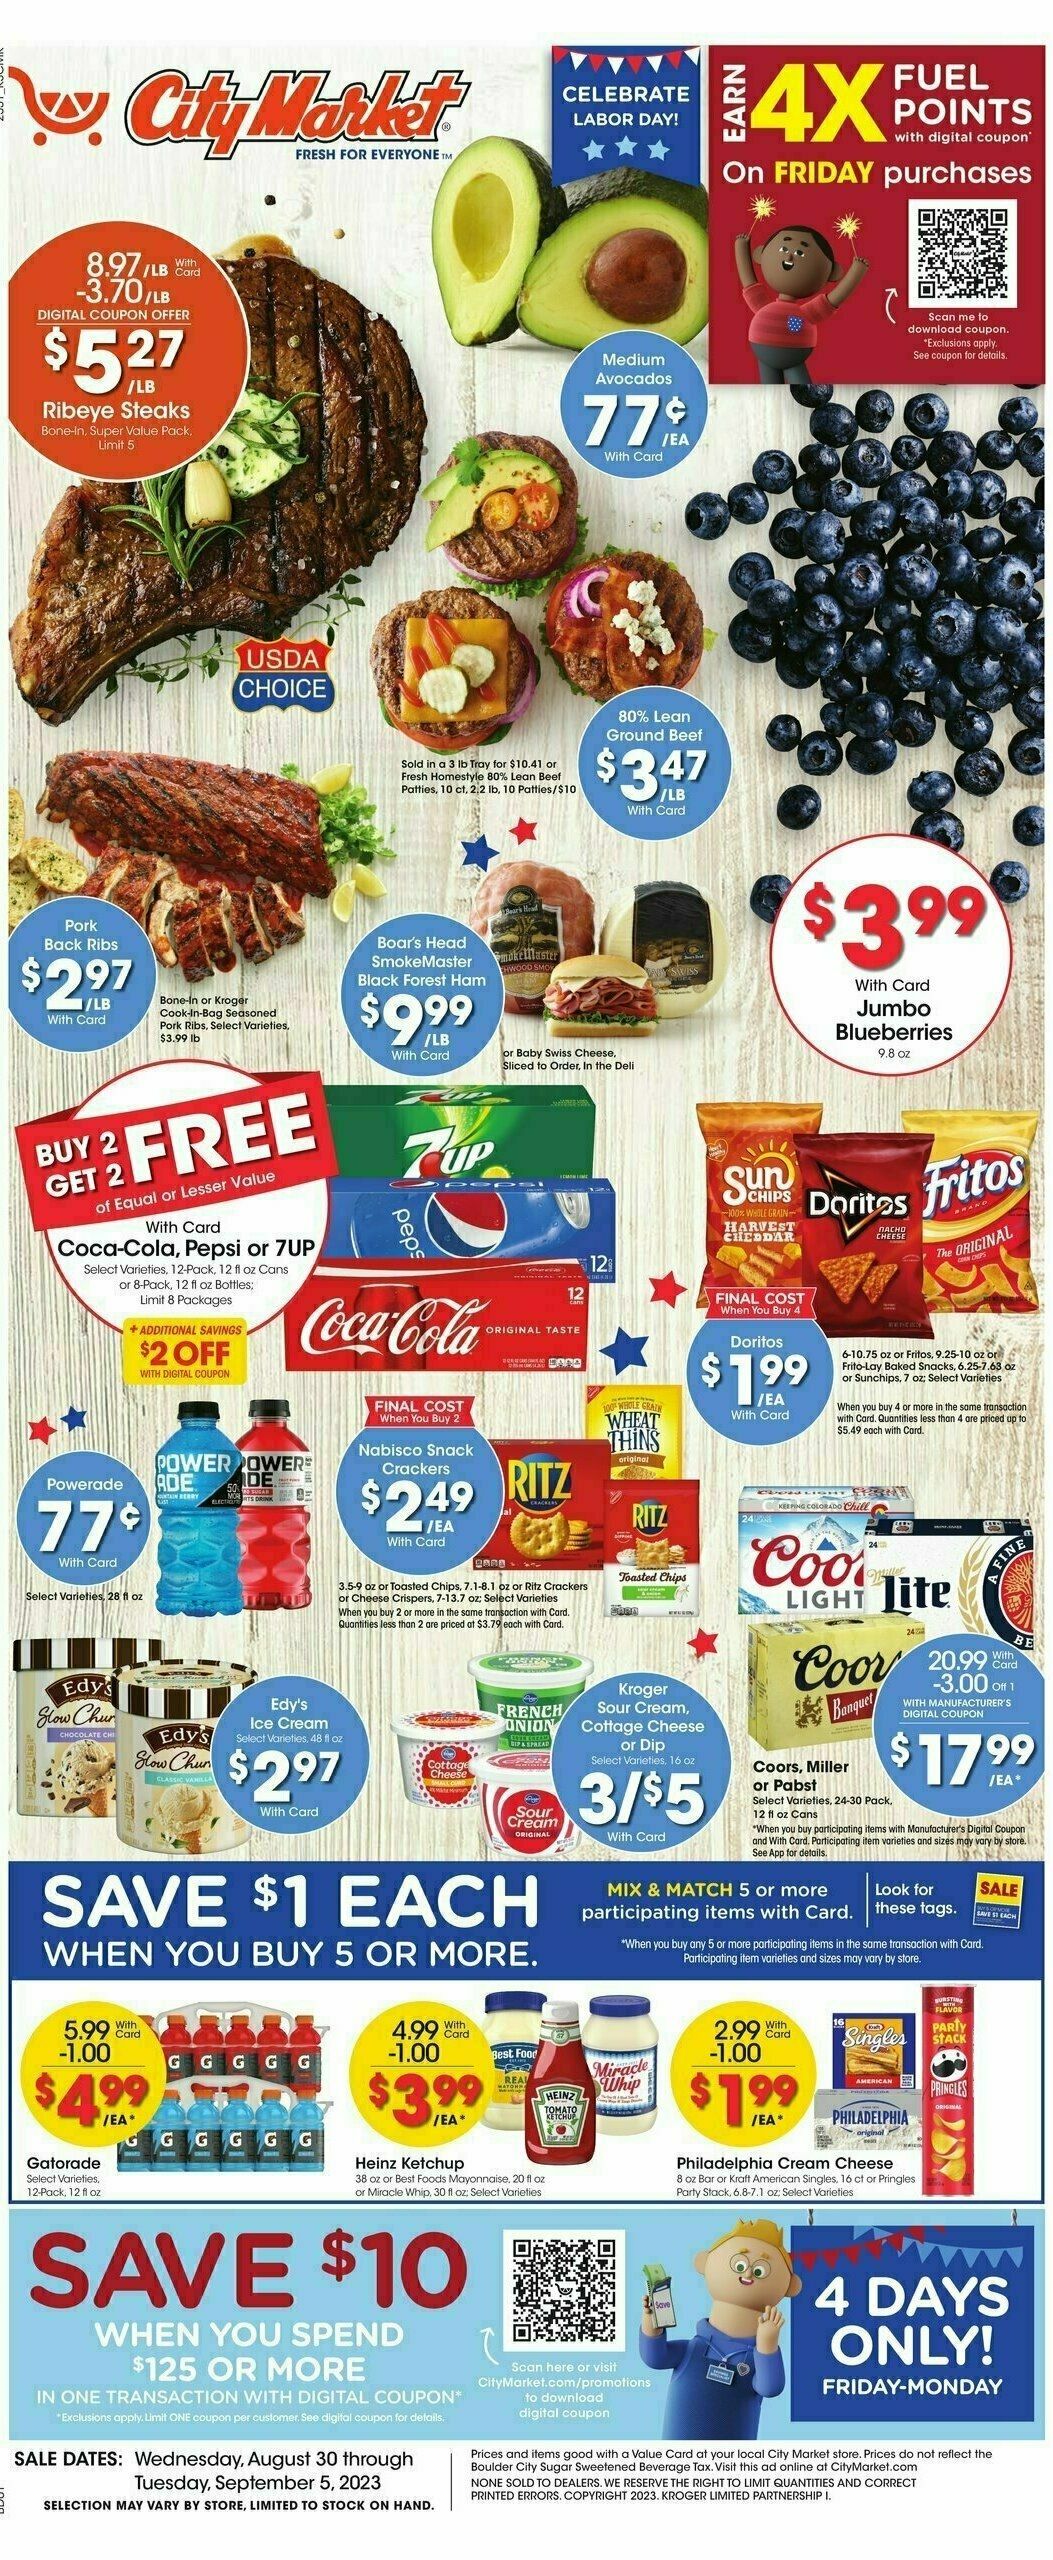 City Market Weekly Ad from August 30